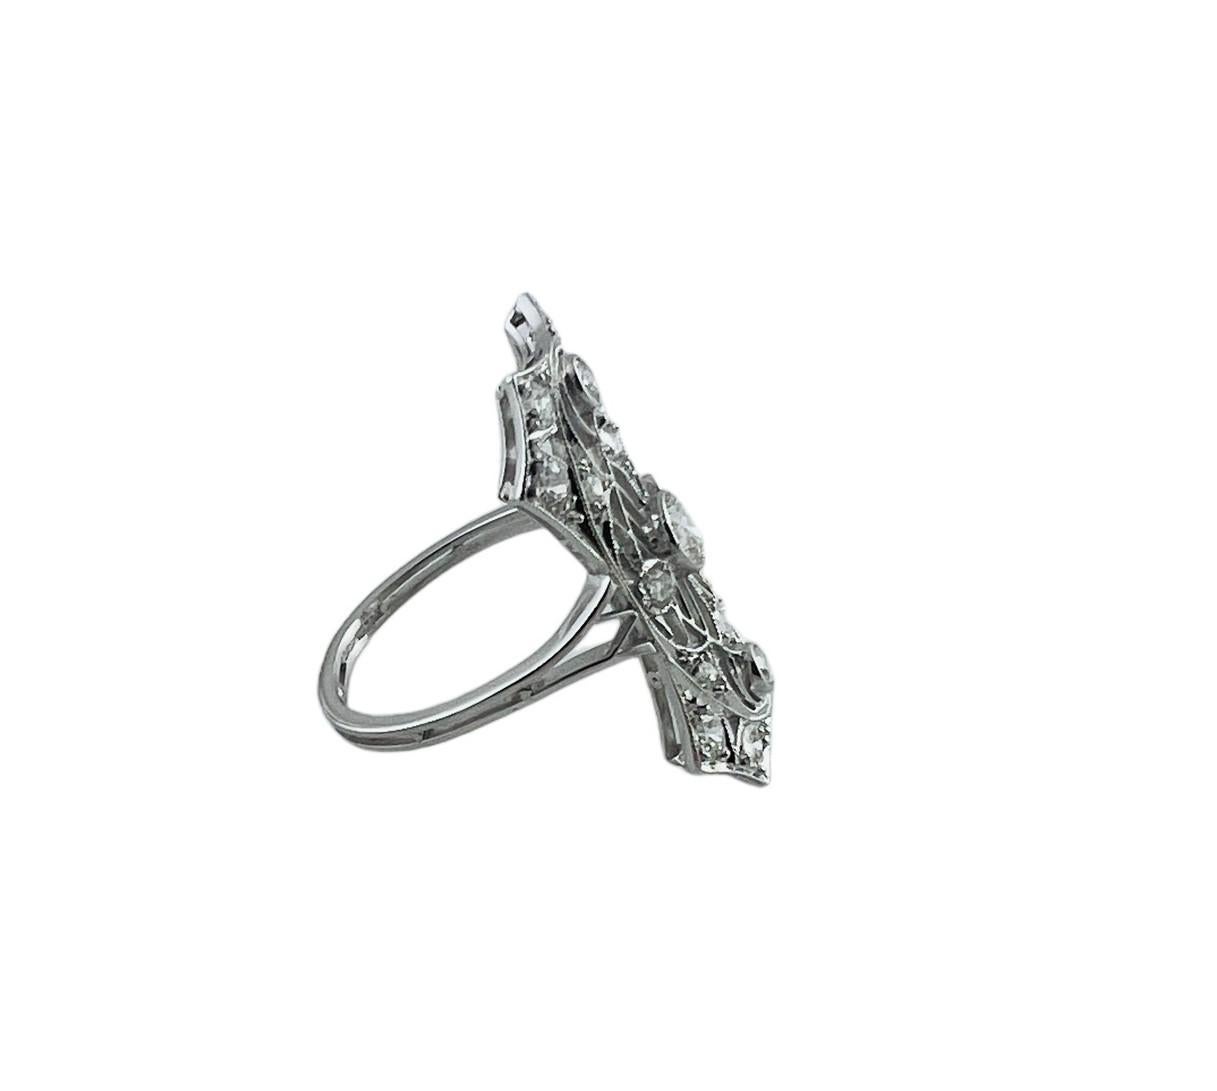 Vintage Platinum and Diamond Ring Size 6.5-

This lovely ring features 14 round brilliant cut diamonds and five old mine cut diamonds set in beautifully detailed platinum.  Top of ring measures 25 mm x 15 mm. Shank measures 1.5 mm.

Total diamond